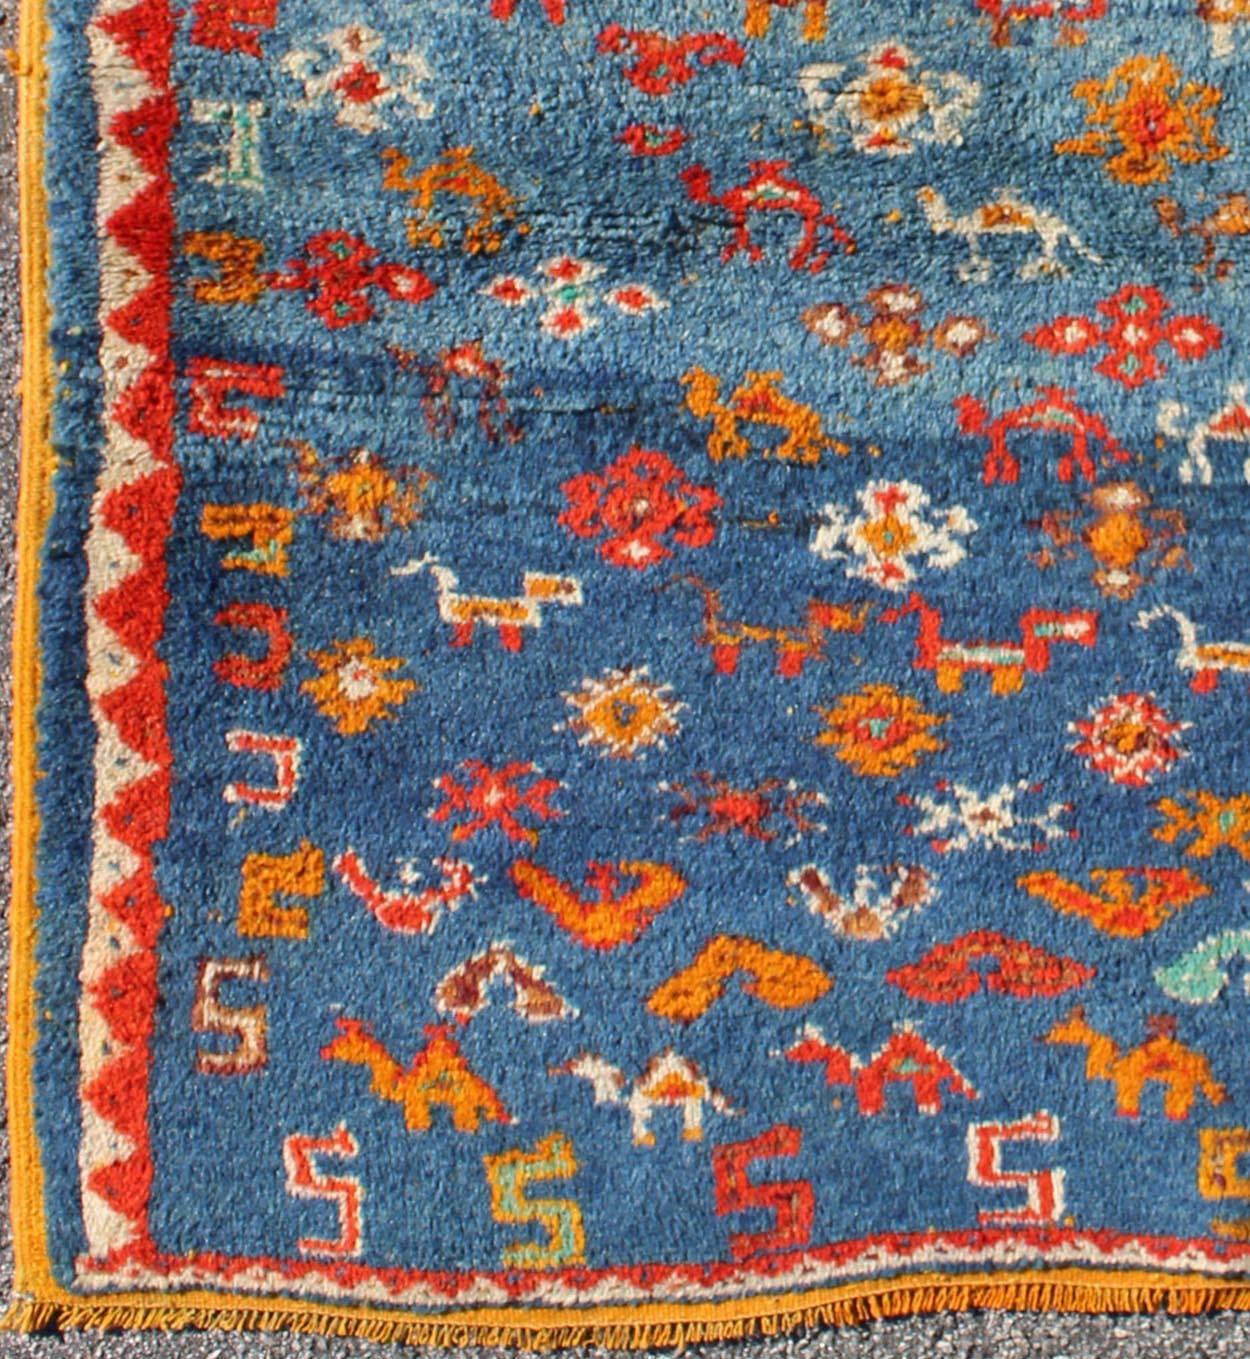 Vintage Moroccan Rug with Beautiful Blue Background.
This charming vintage Moroccan rug features a wonderful blue background with orange accents. The field design contains colorful peacocks and birds.
Measures: 3'5 x 4'.